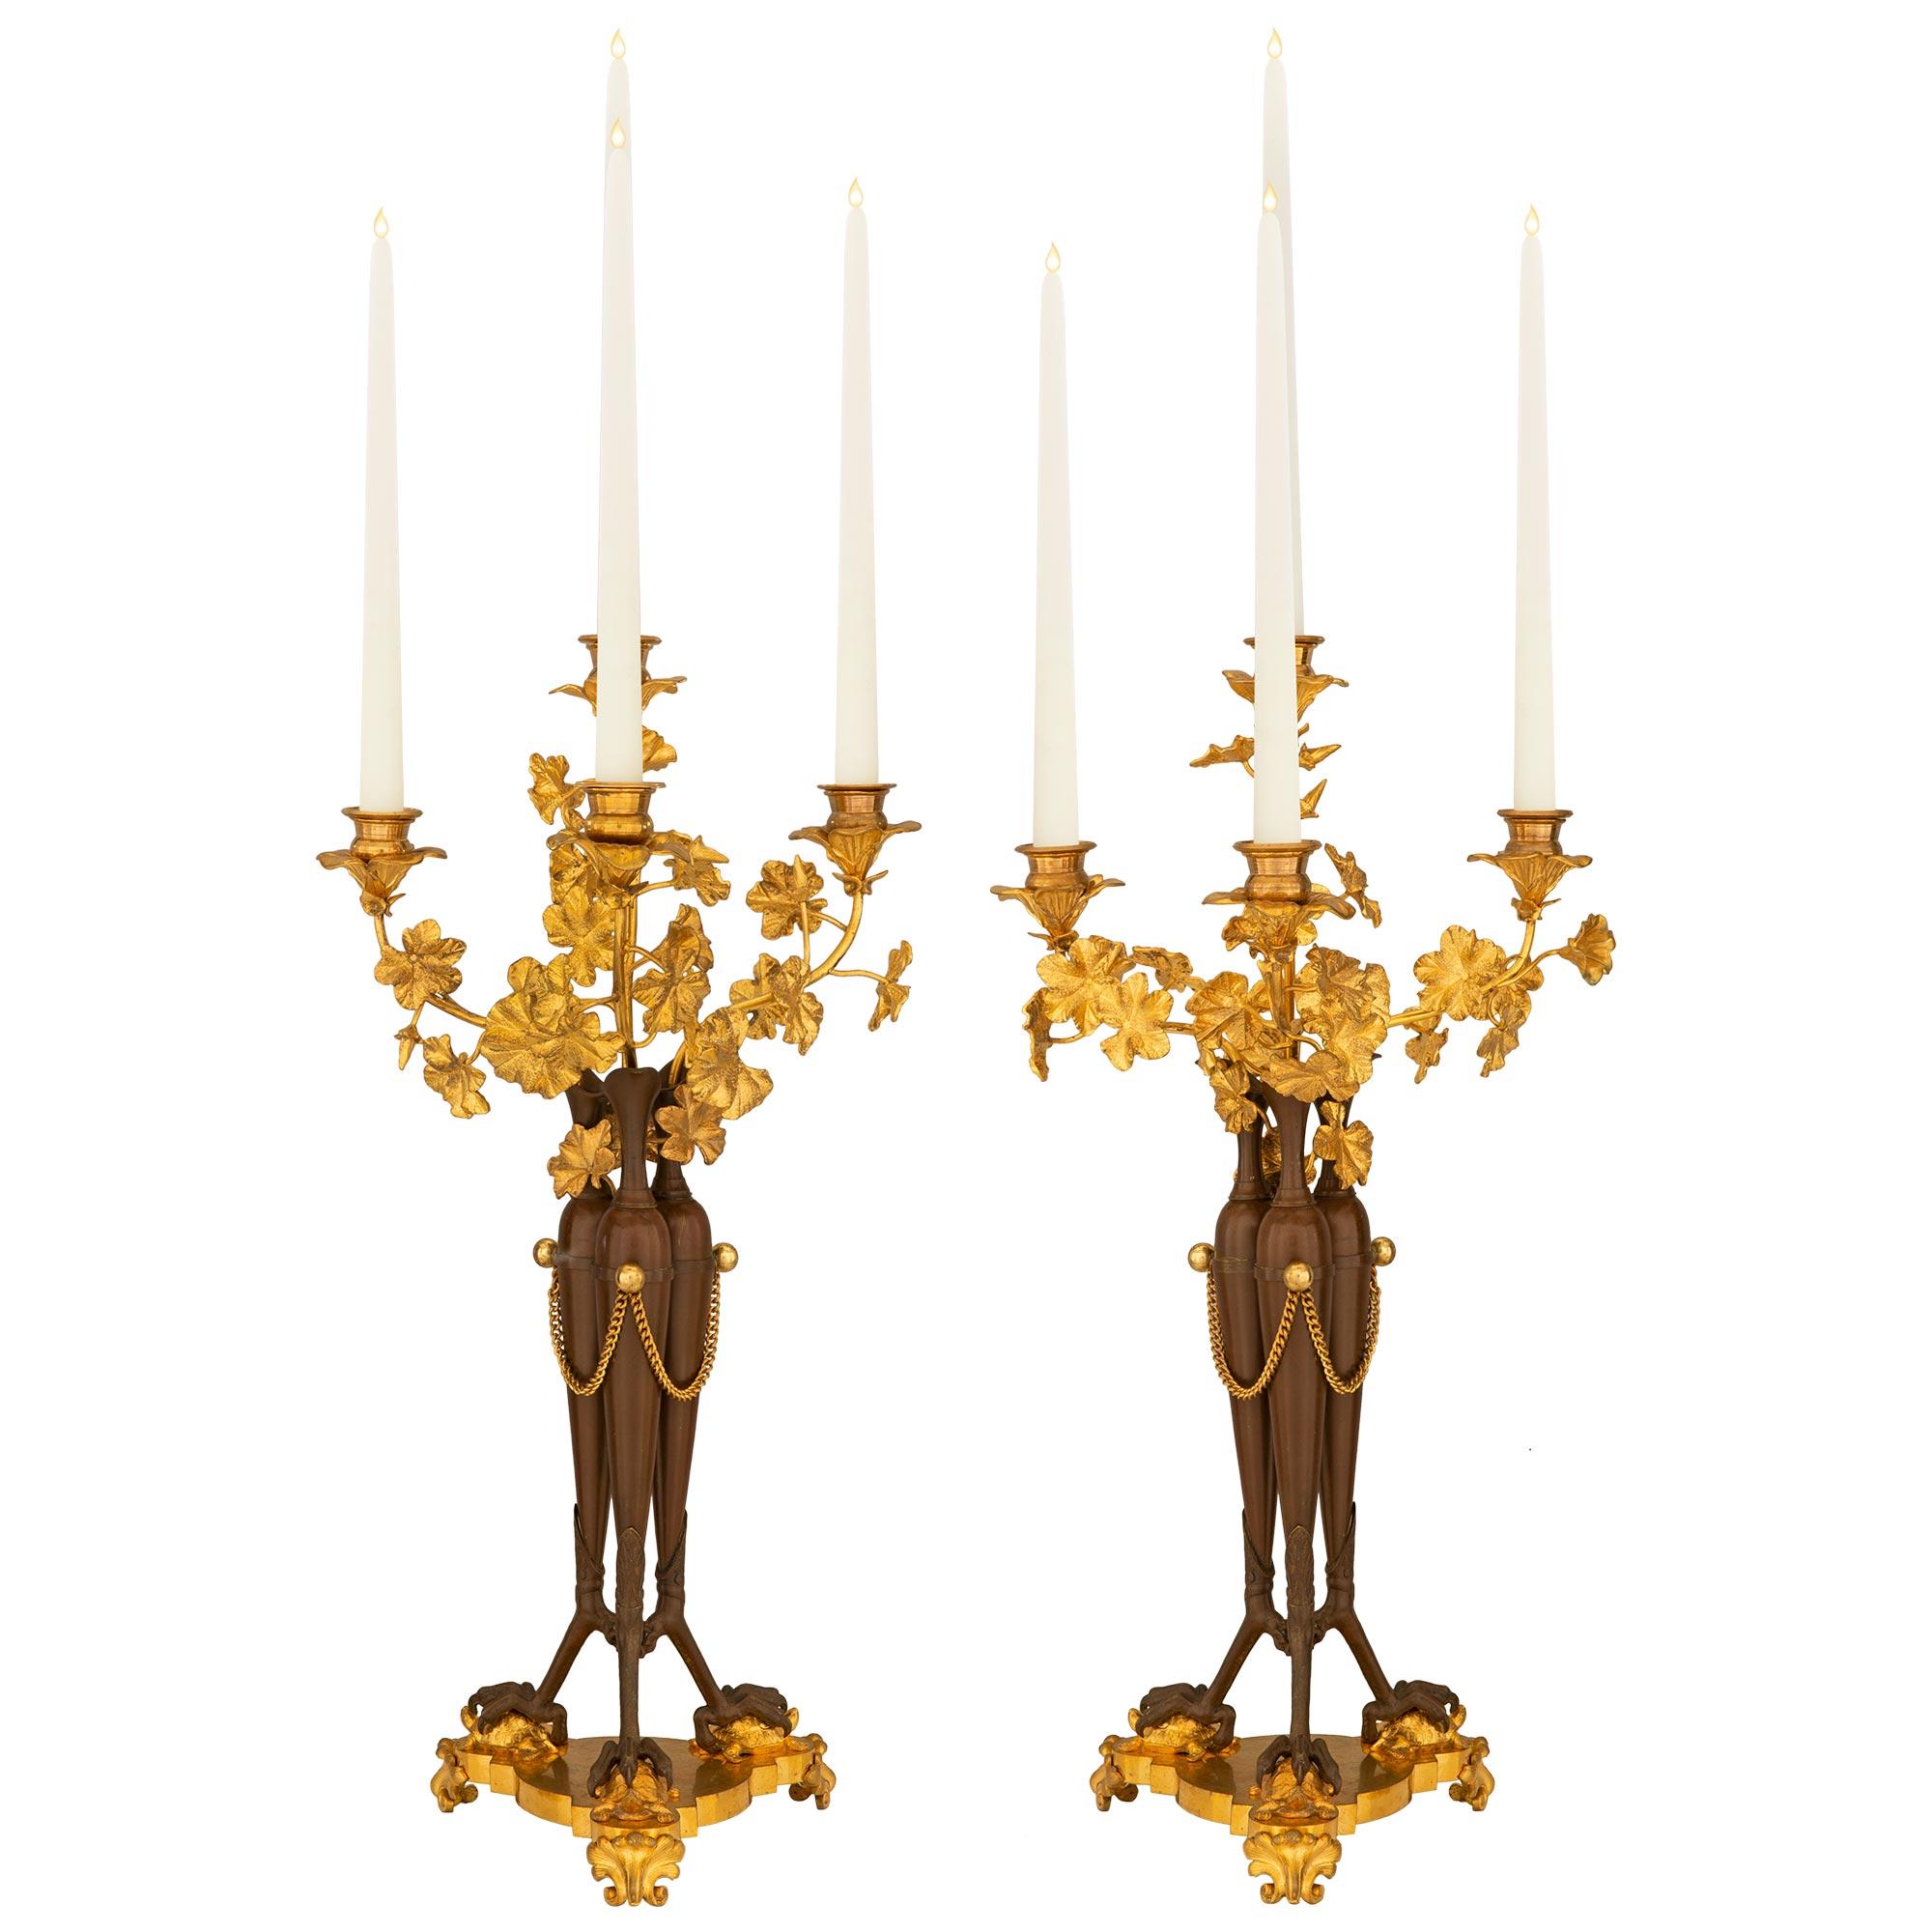 Pair of French 19th Century Neoclassical St. Bronze and Ormolu Candelabras For Sale 6